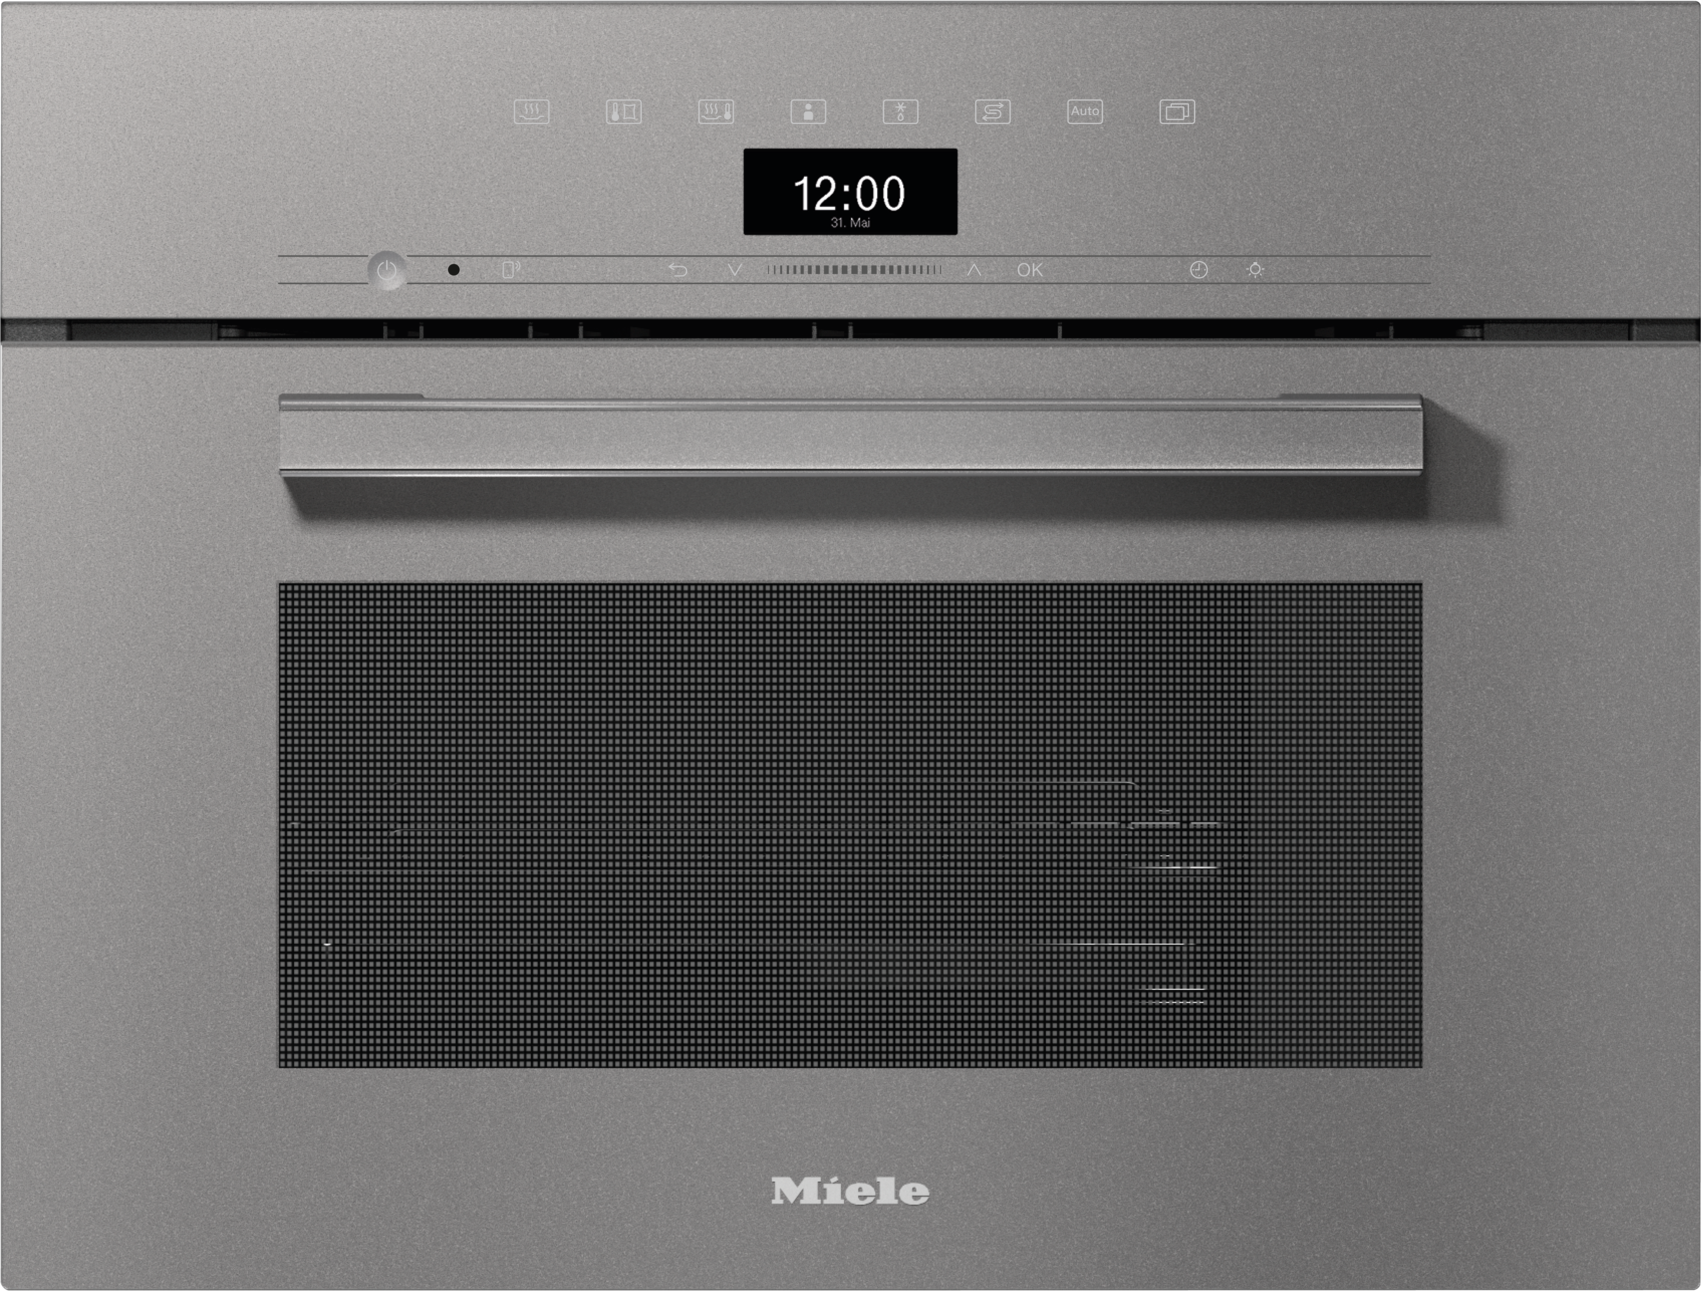 DG 7440Built-in steam oven for healthy cooking with automatic programmes, networking and sous-vide cooking.